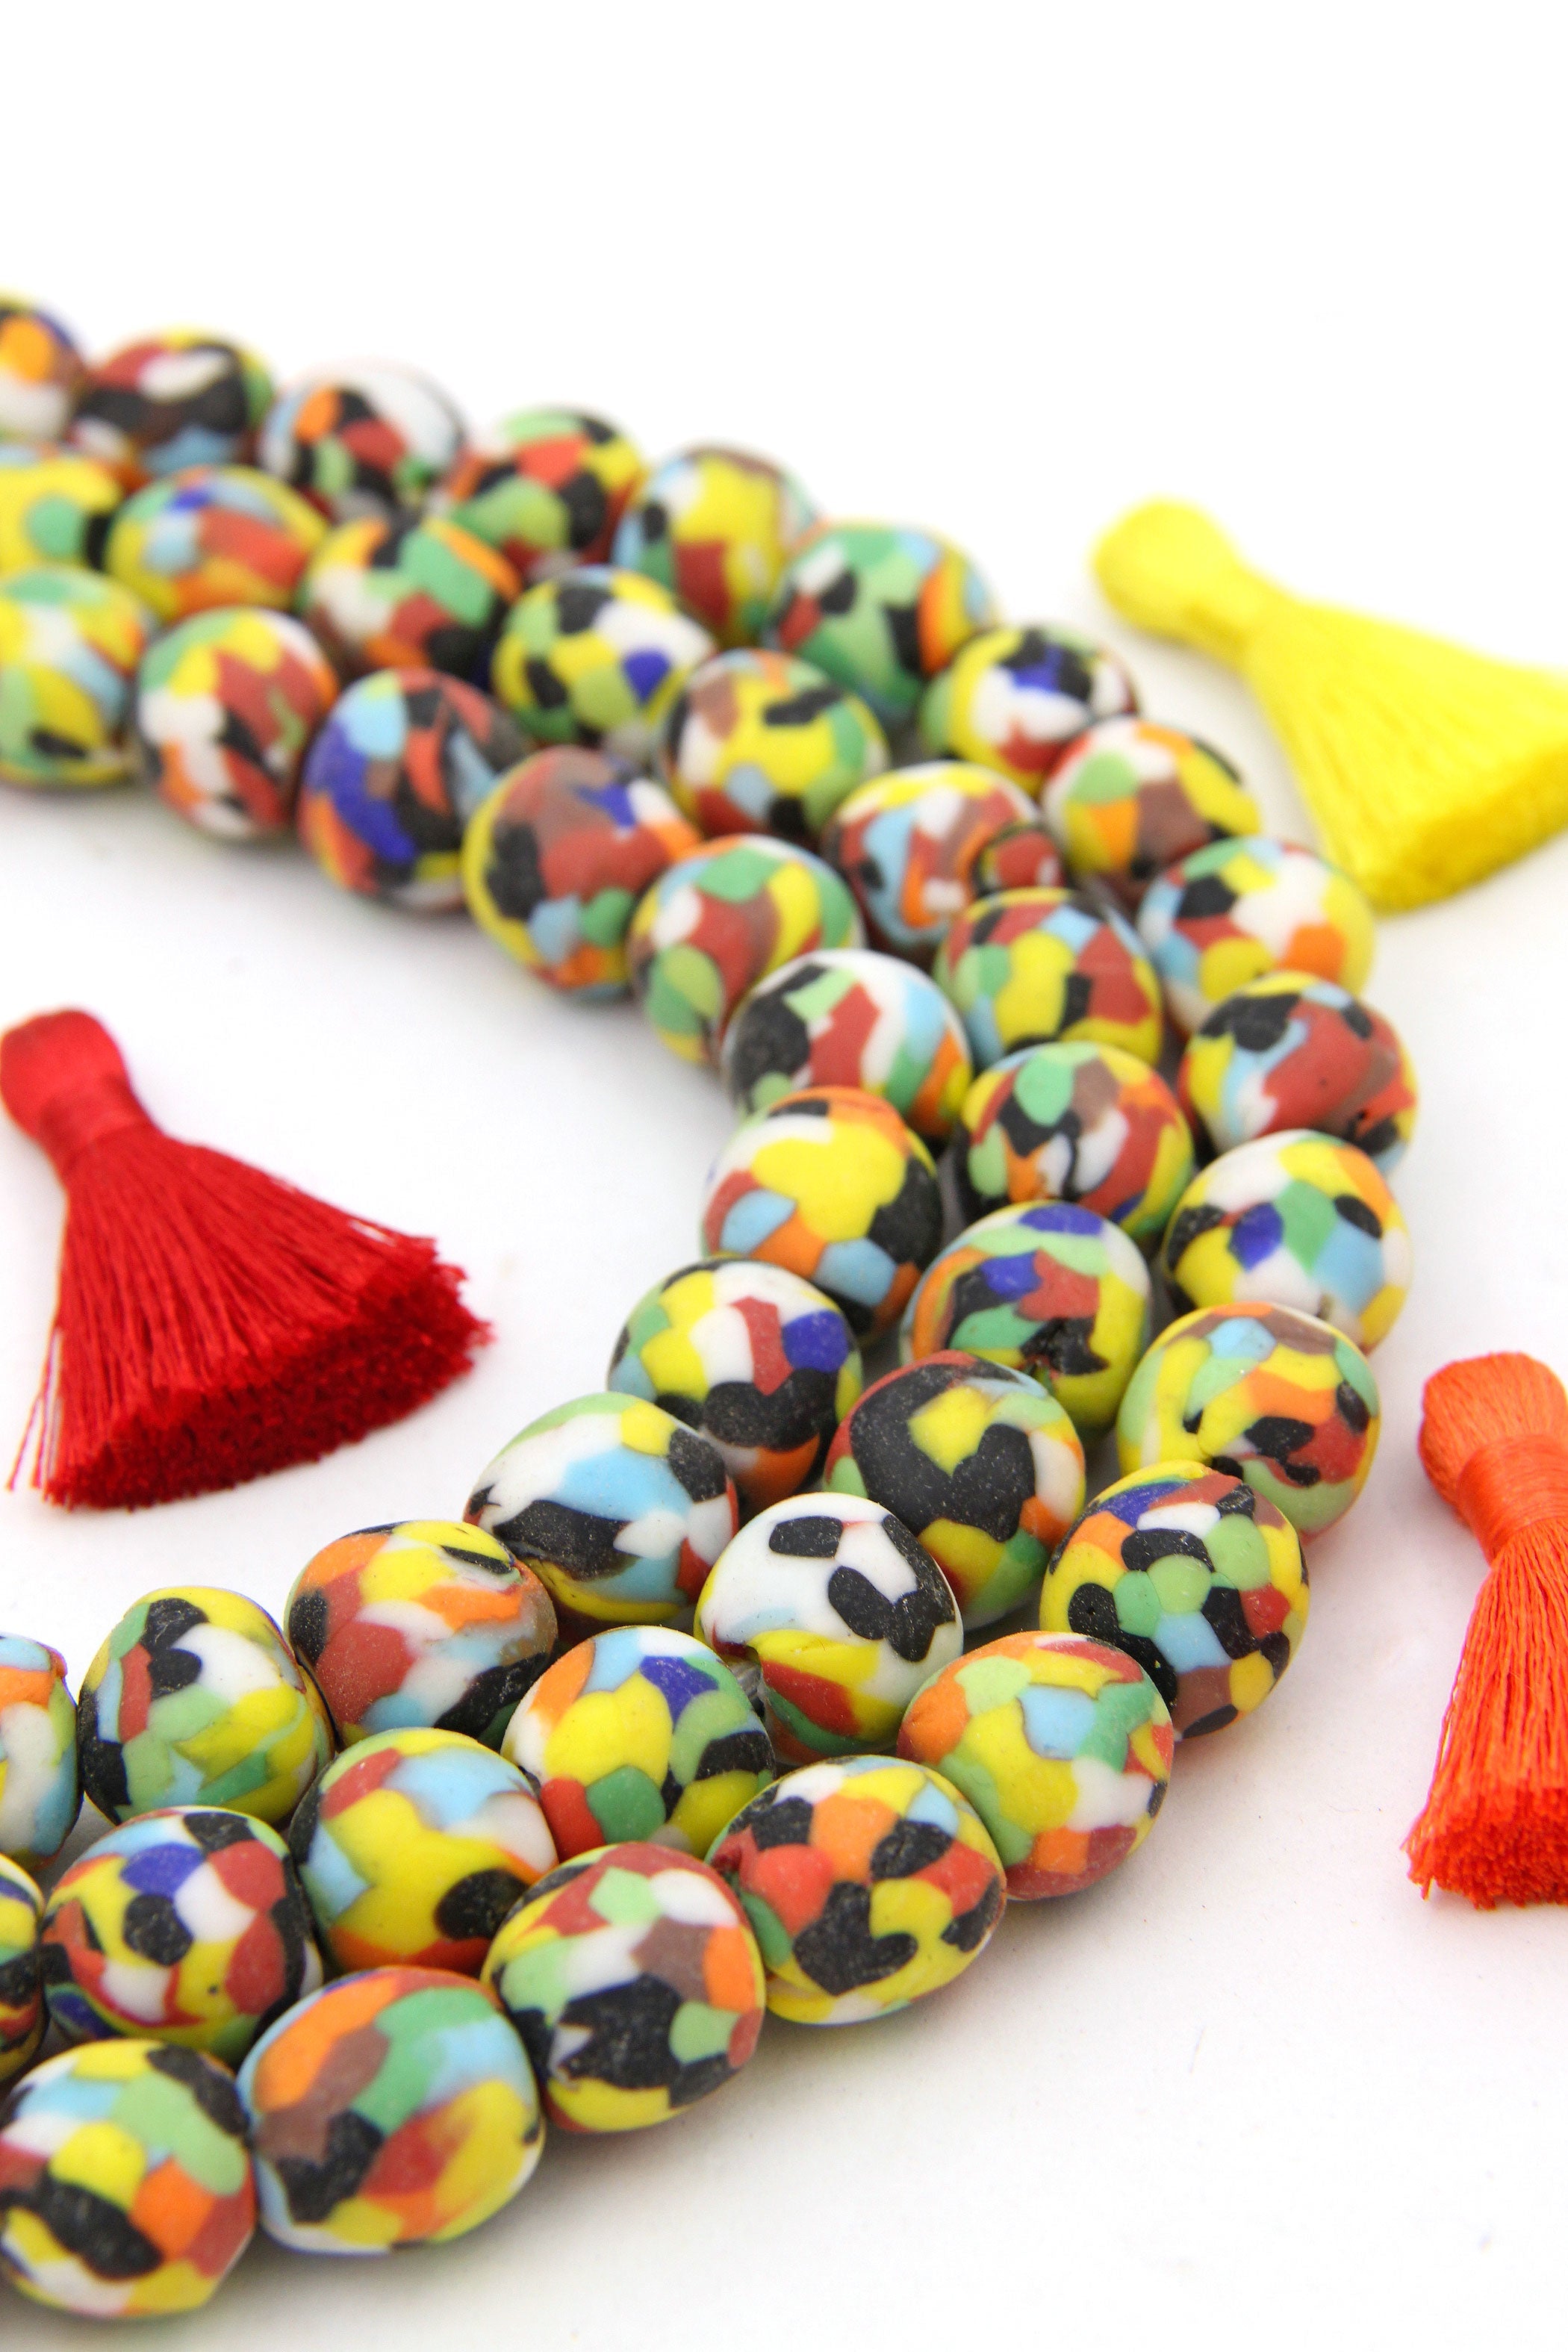 14mm Recycled African Glass Beads, Made in Ghana